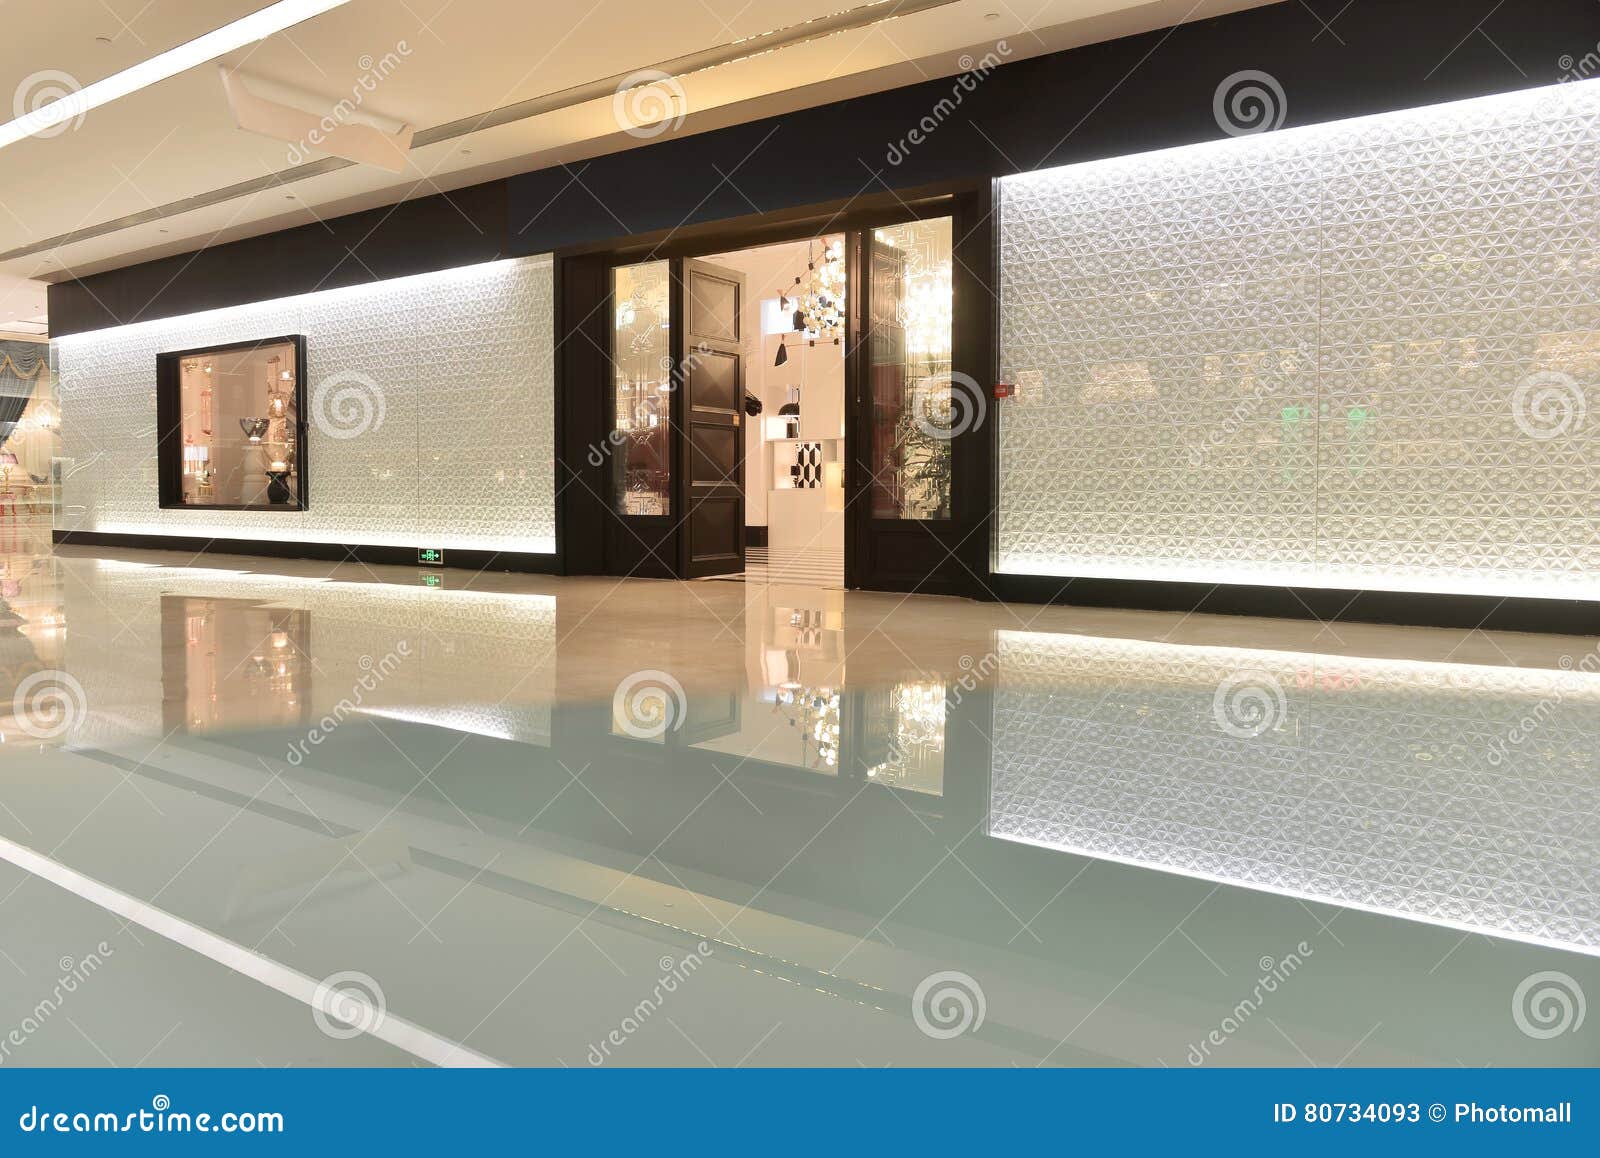 passageway and lighting shop in commercial building